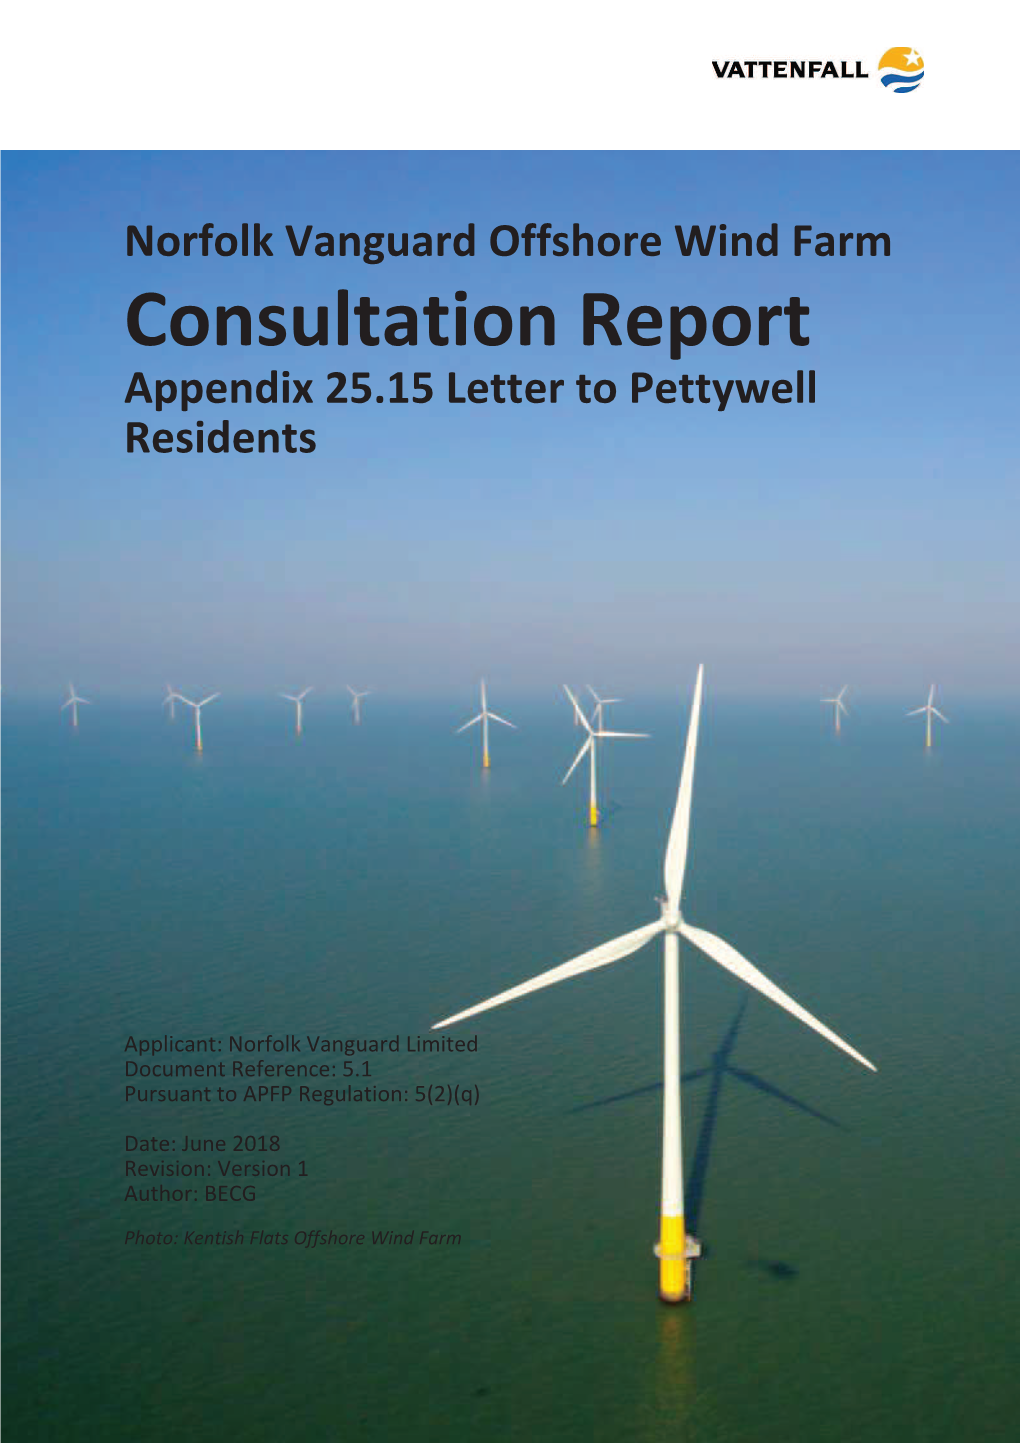 Consultation Report Appendix 25.15 Letter to Pettywell Residents